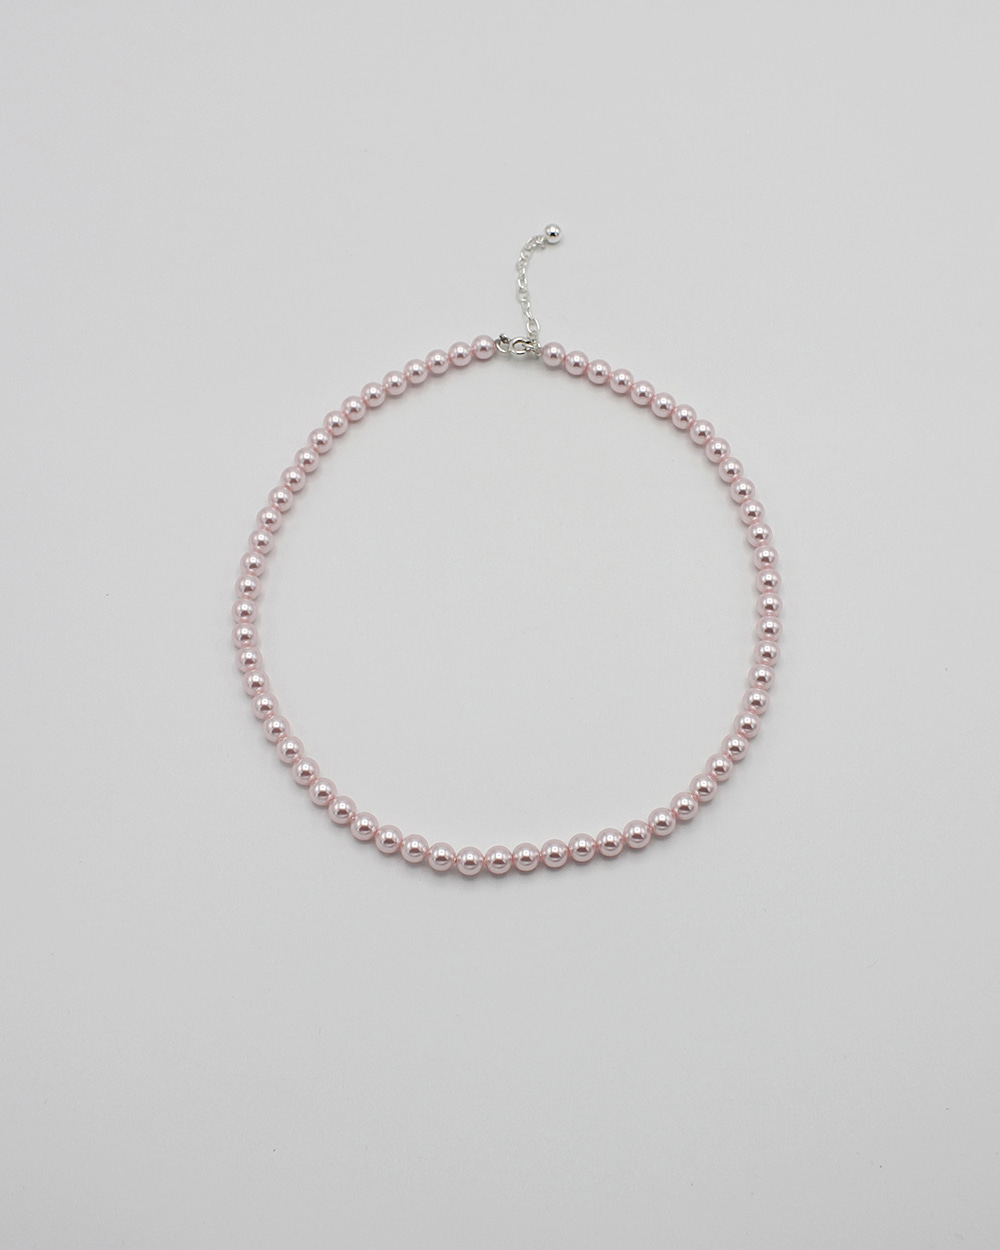 6MM PINK PEARL NECKLACE - 925 SILVER